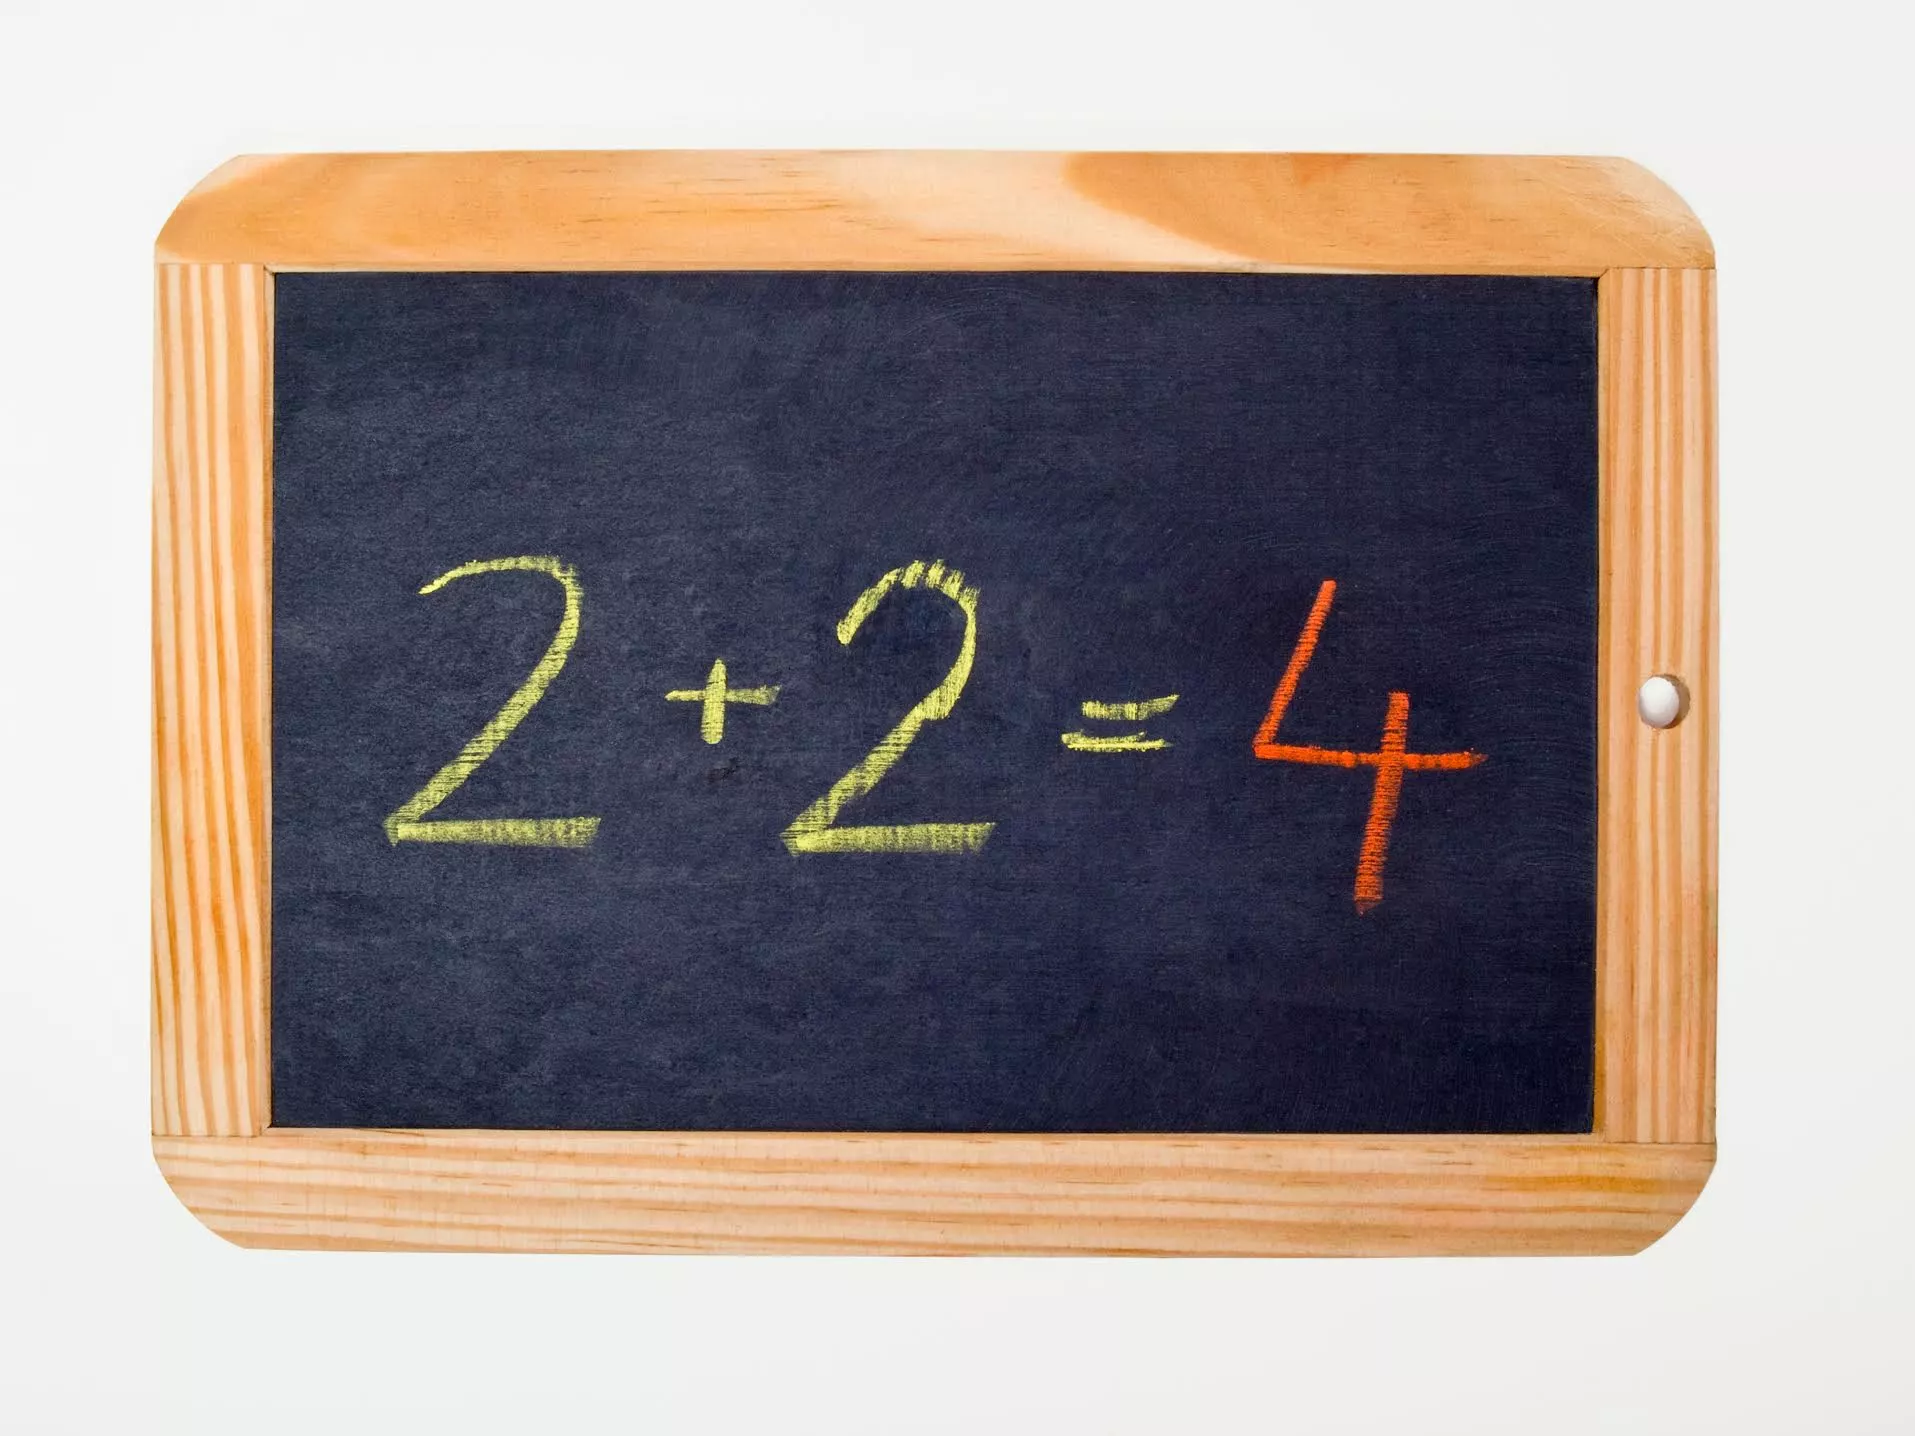 Two plus two equals four - chalk figures on blackboard. Image: Shutterstock via Giles Pegram